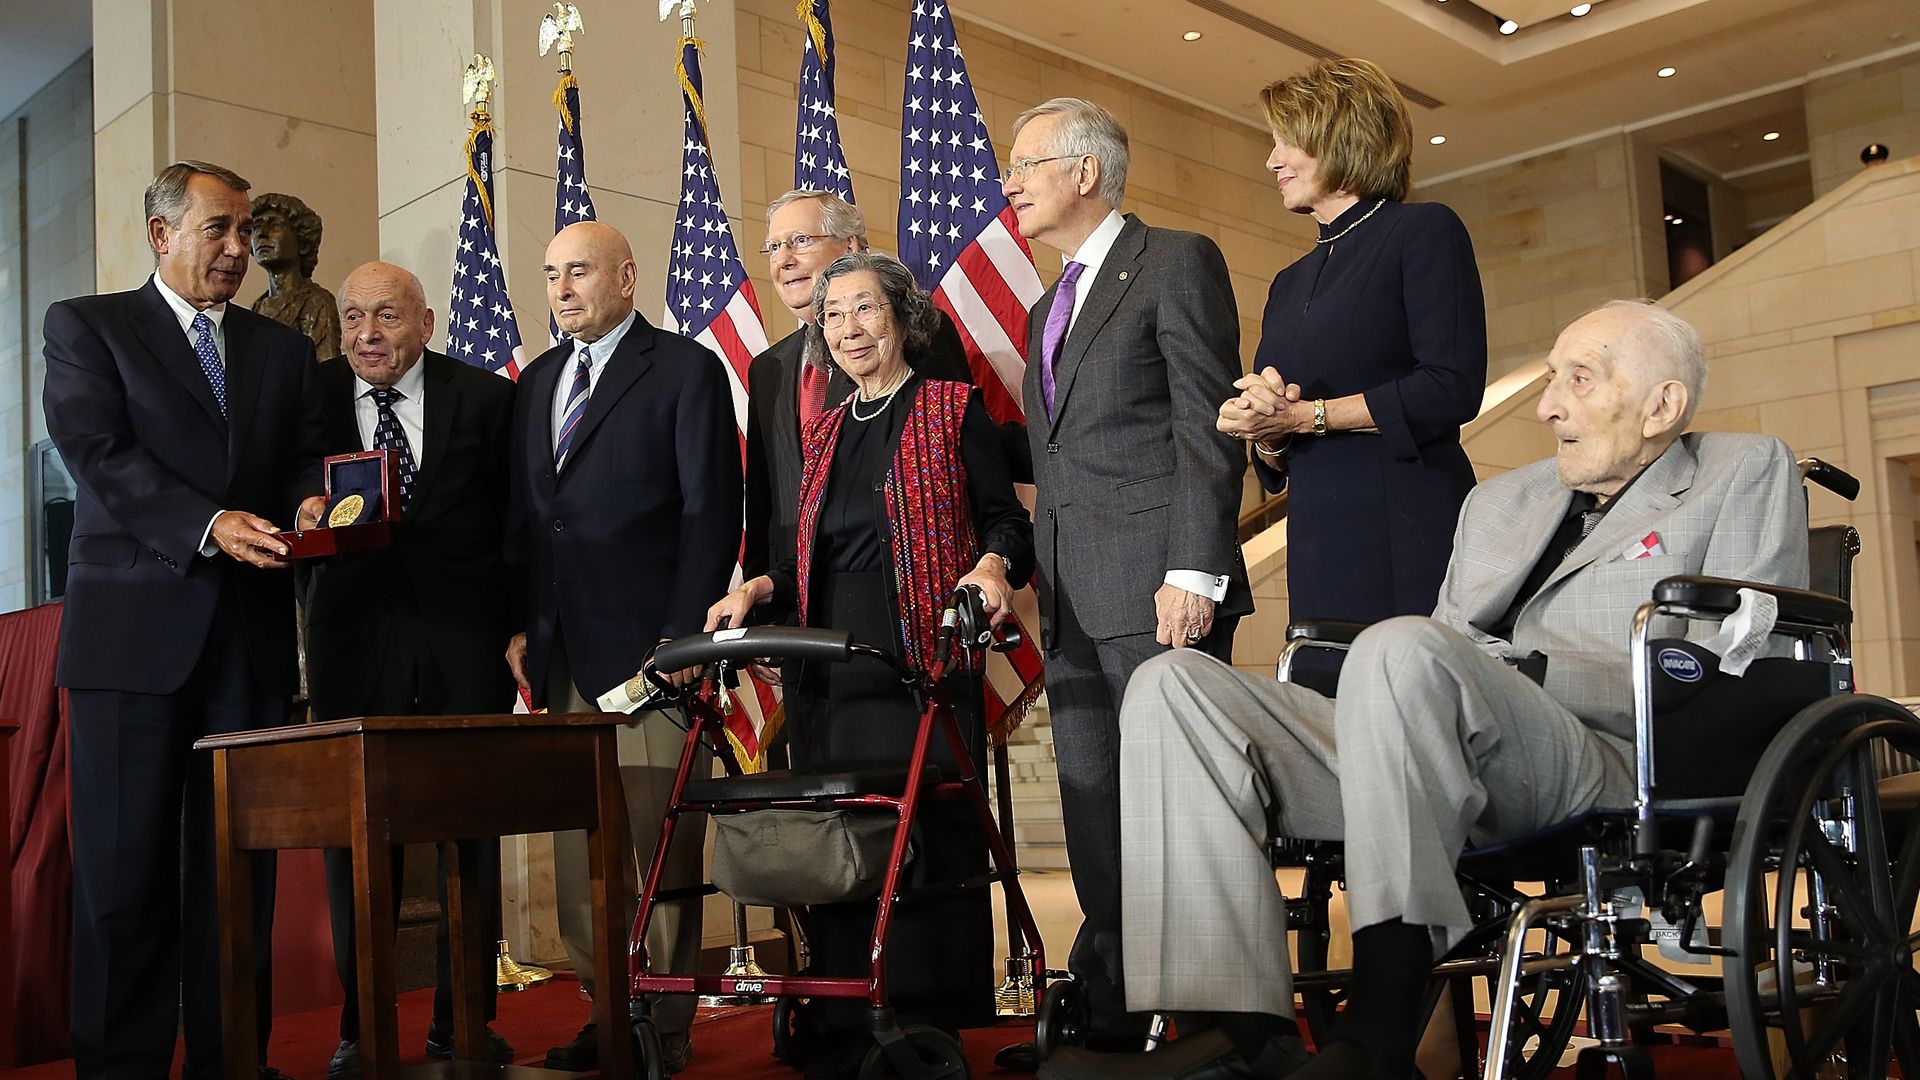 John Boehner presenting a medal to group of Monuments Men and Women, alongside fellow members of Congress. 